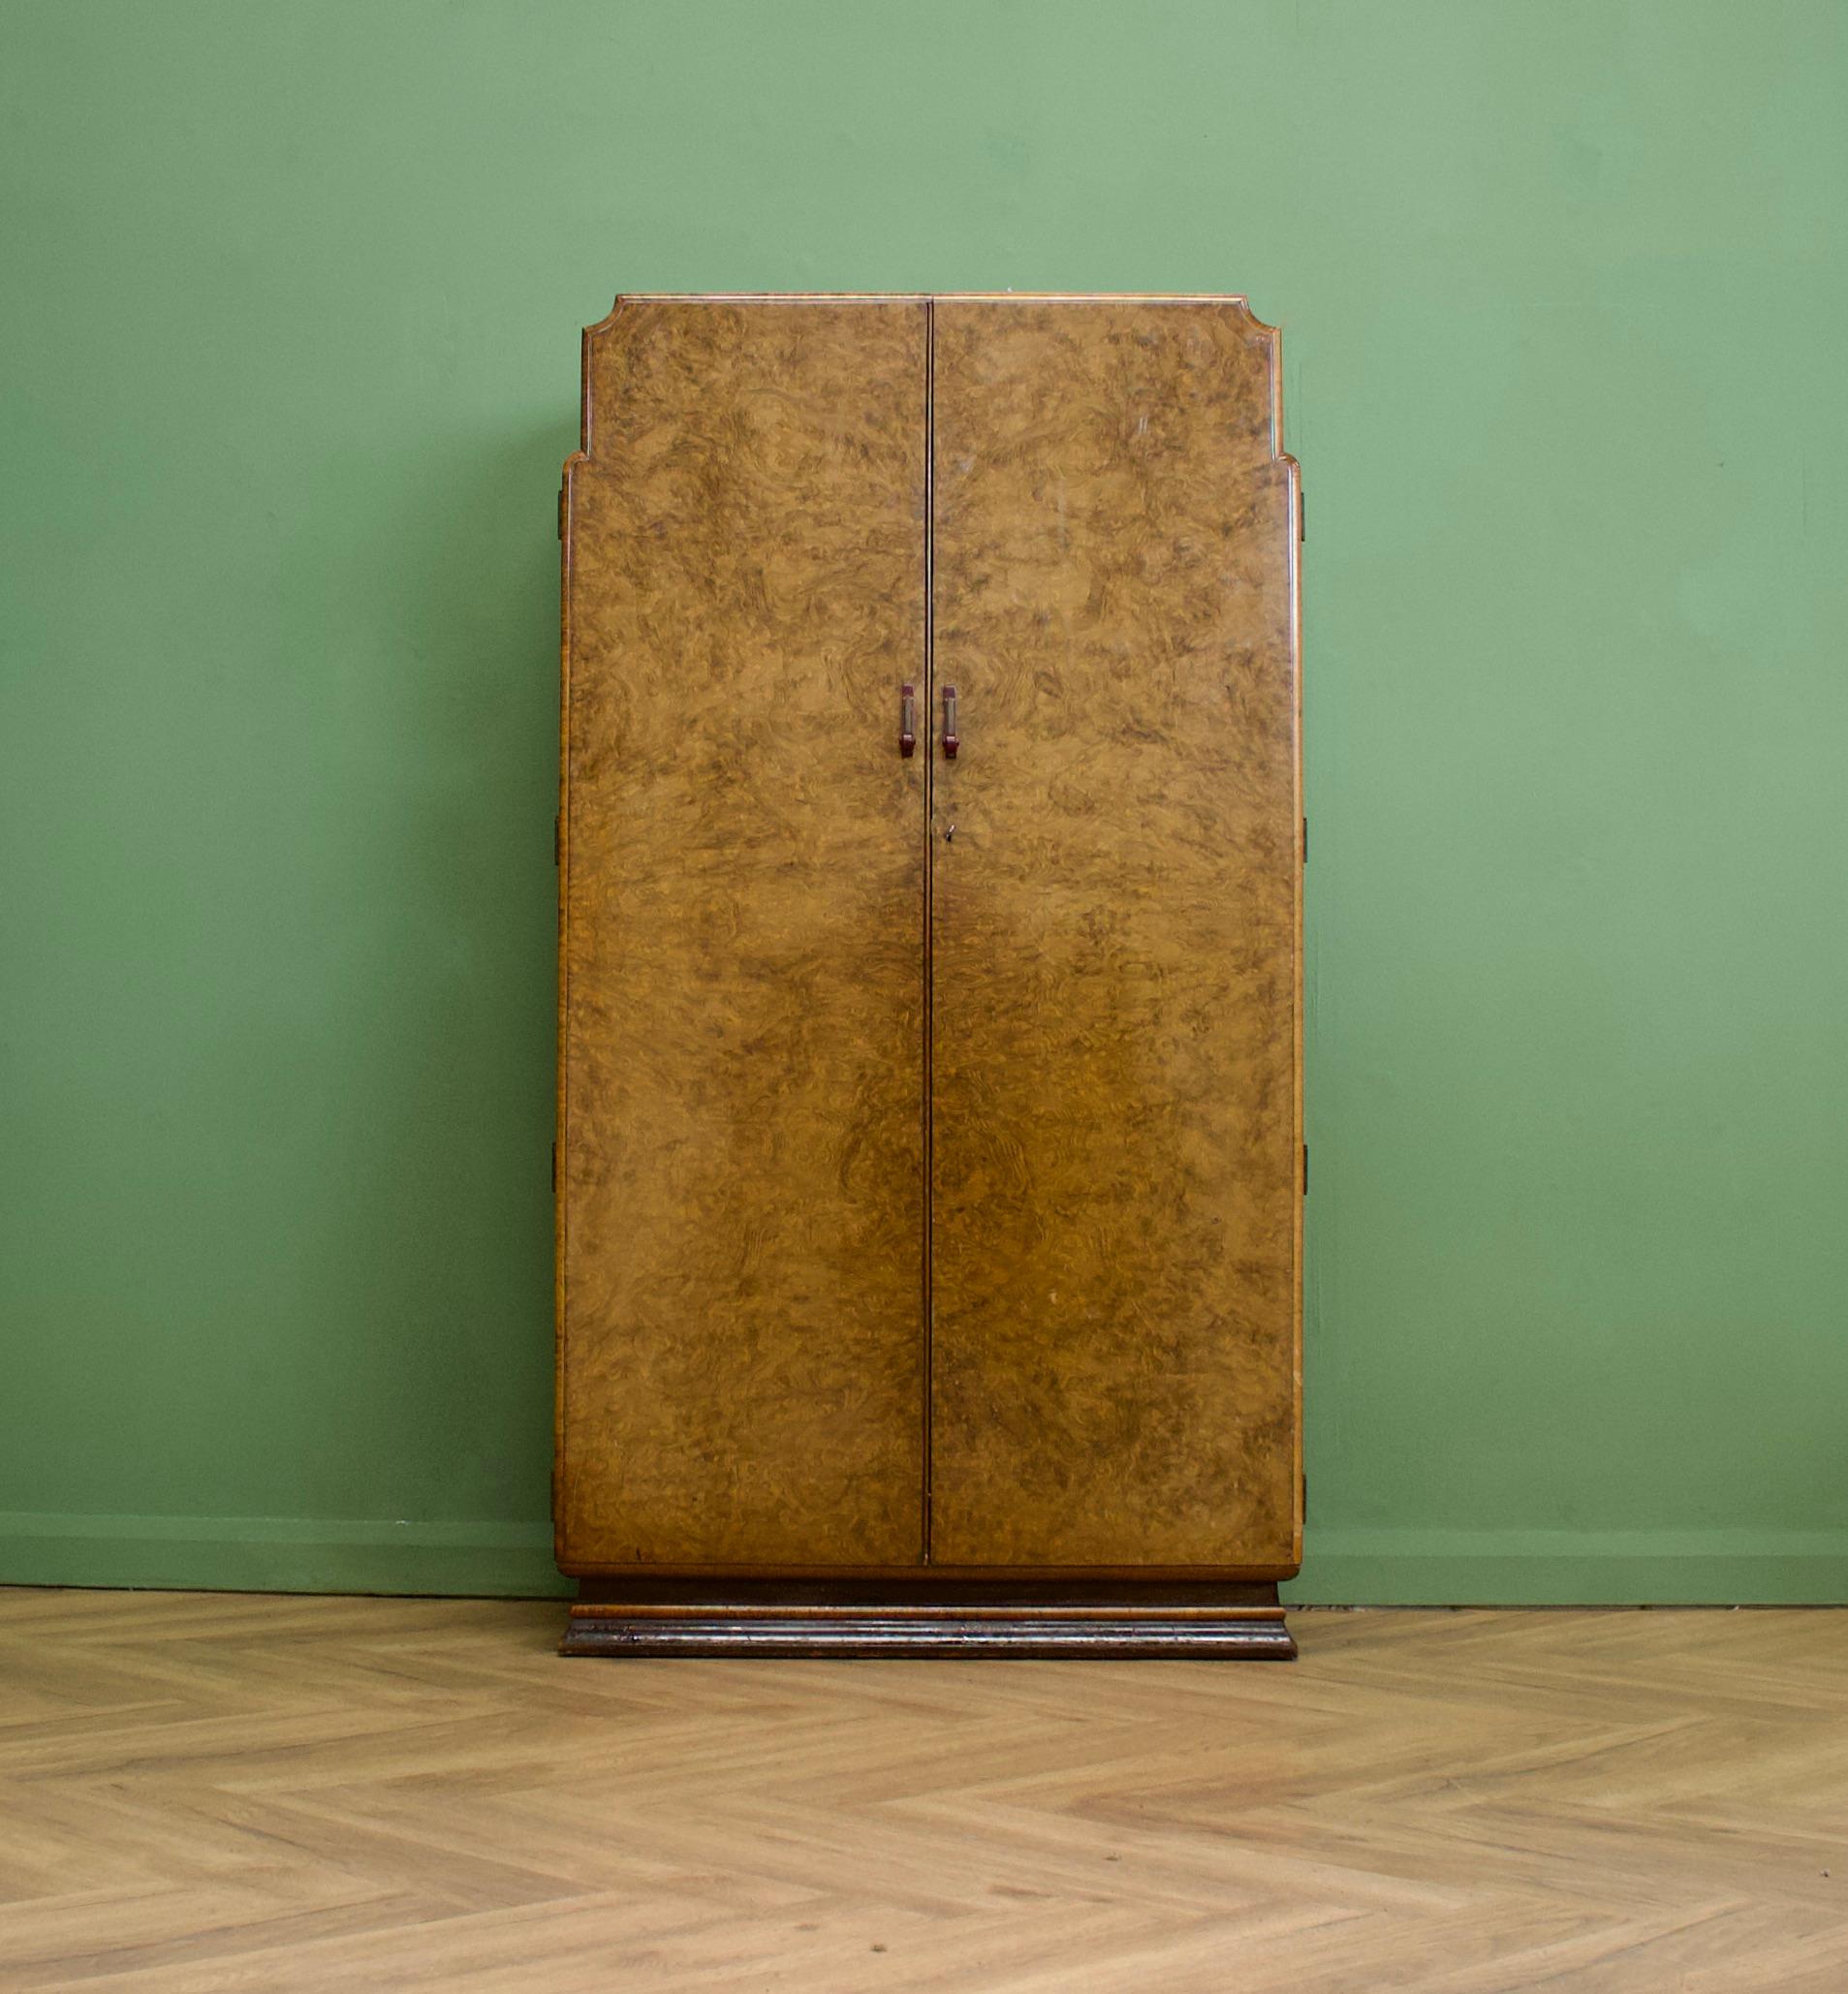 An Art Deco walnut compact wardrobe featuring a skyscraper style front
Complete with unique red bakelite and brass handles  - circa 1930's
Fitted out with a clothes and shoe rail